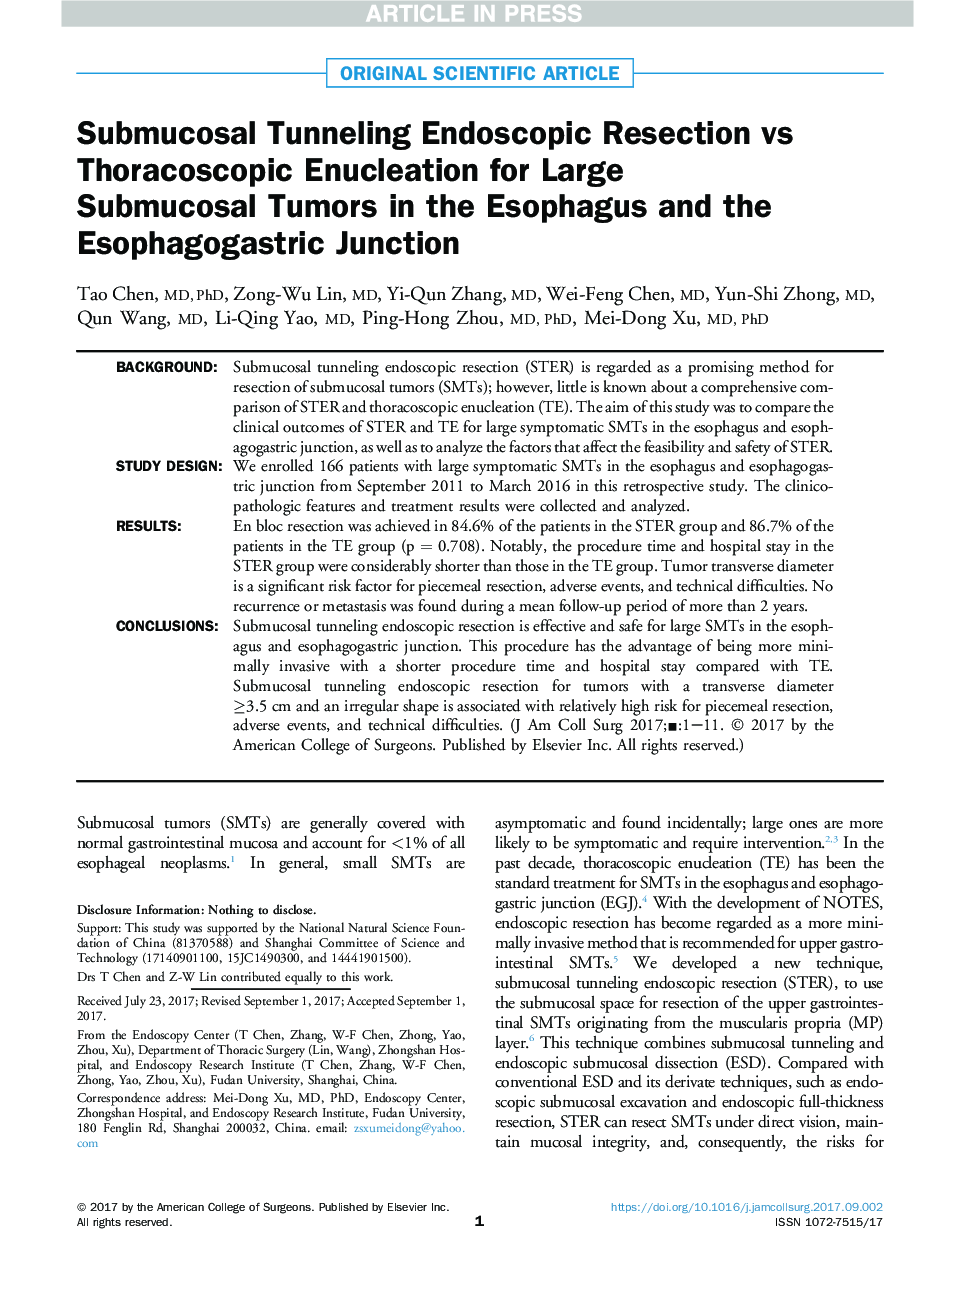 Submucosal Tunneling Endoscopic Resection vs Thoracoscopic Enucleation for Large Submucosal Tumors in the Esophagus and the Esophagogastric Junction